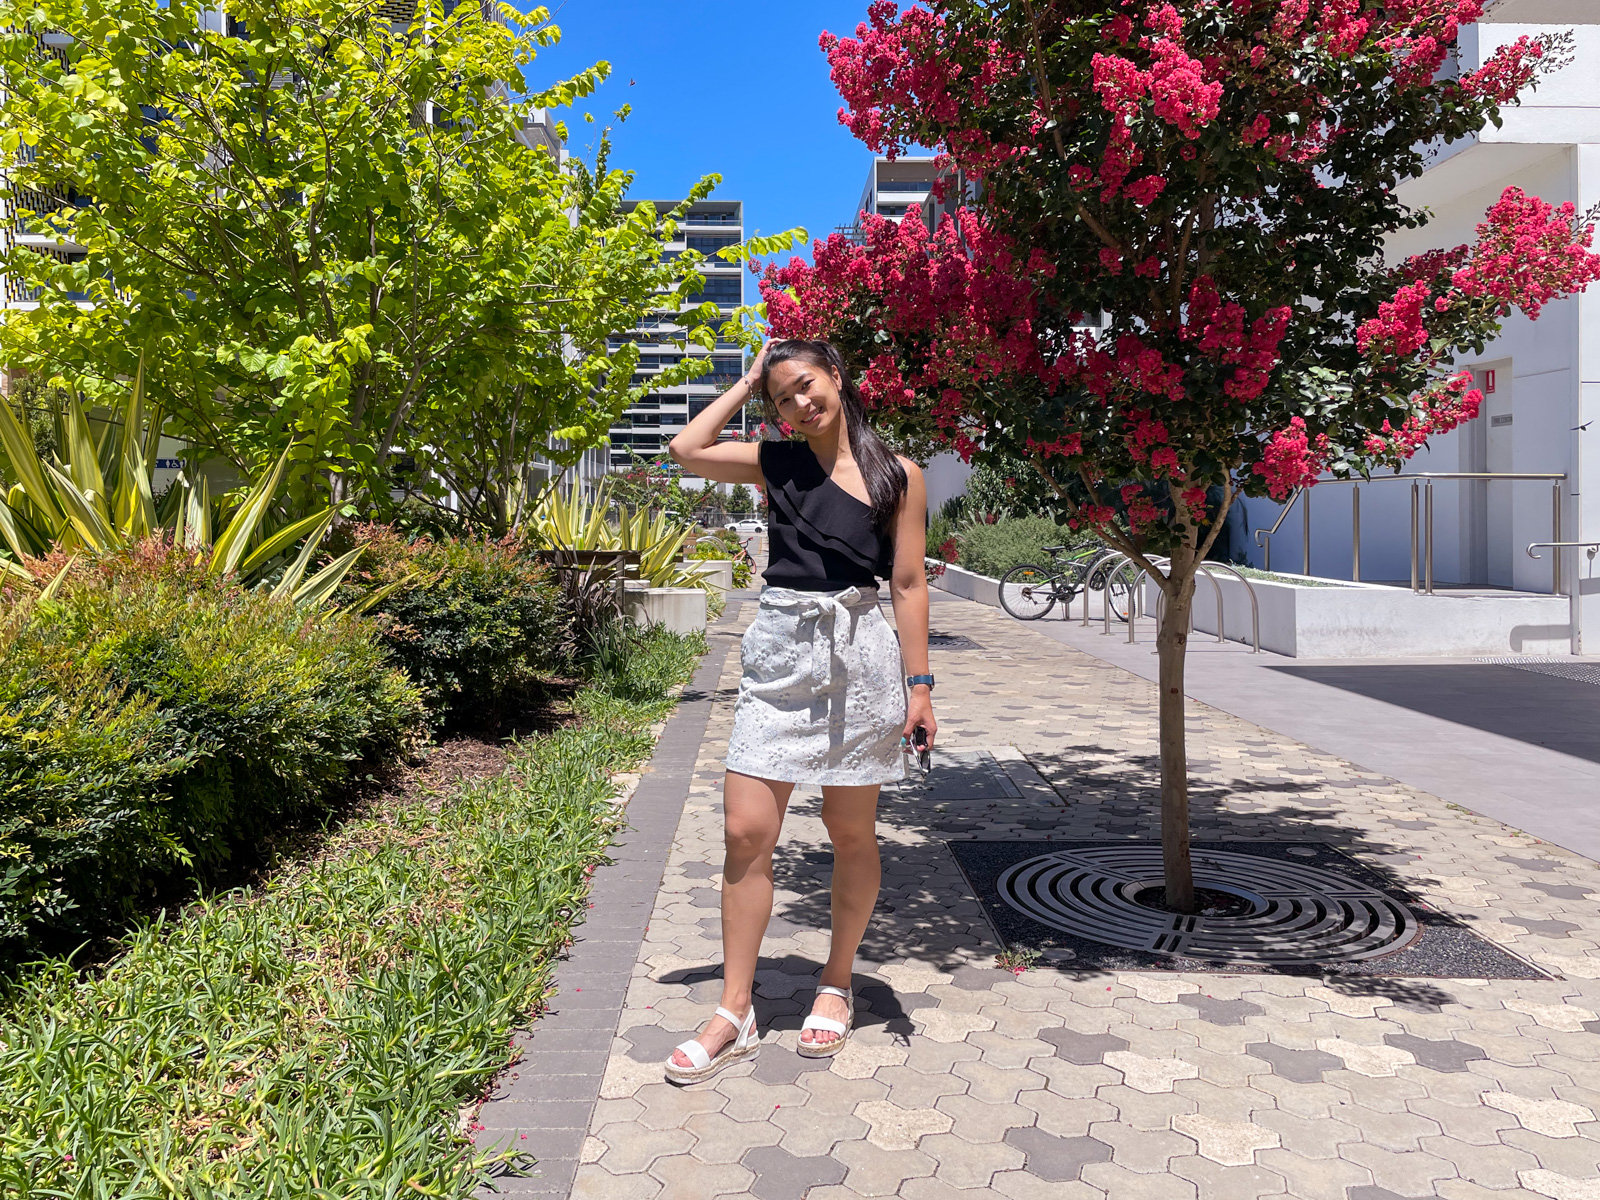 The same woman from previous photos on this page, in the same outfit. She is holding her sunglasses in her hand, and standing next to some trees with pink flowers. In the background are high-rise apartments.